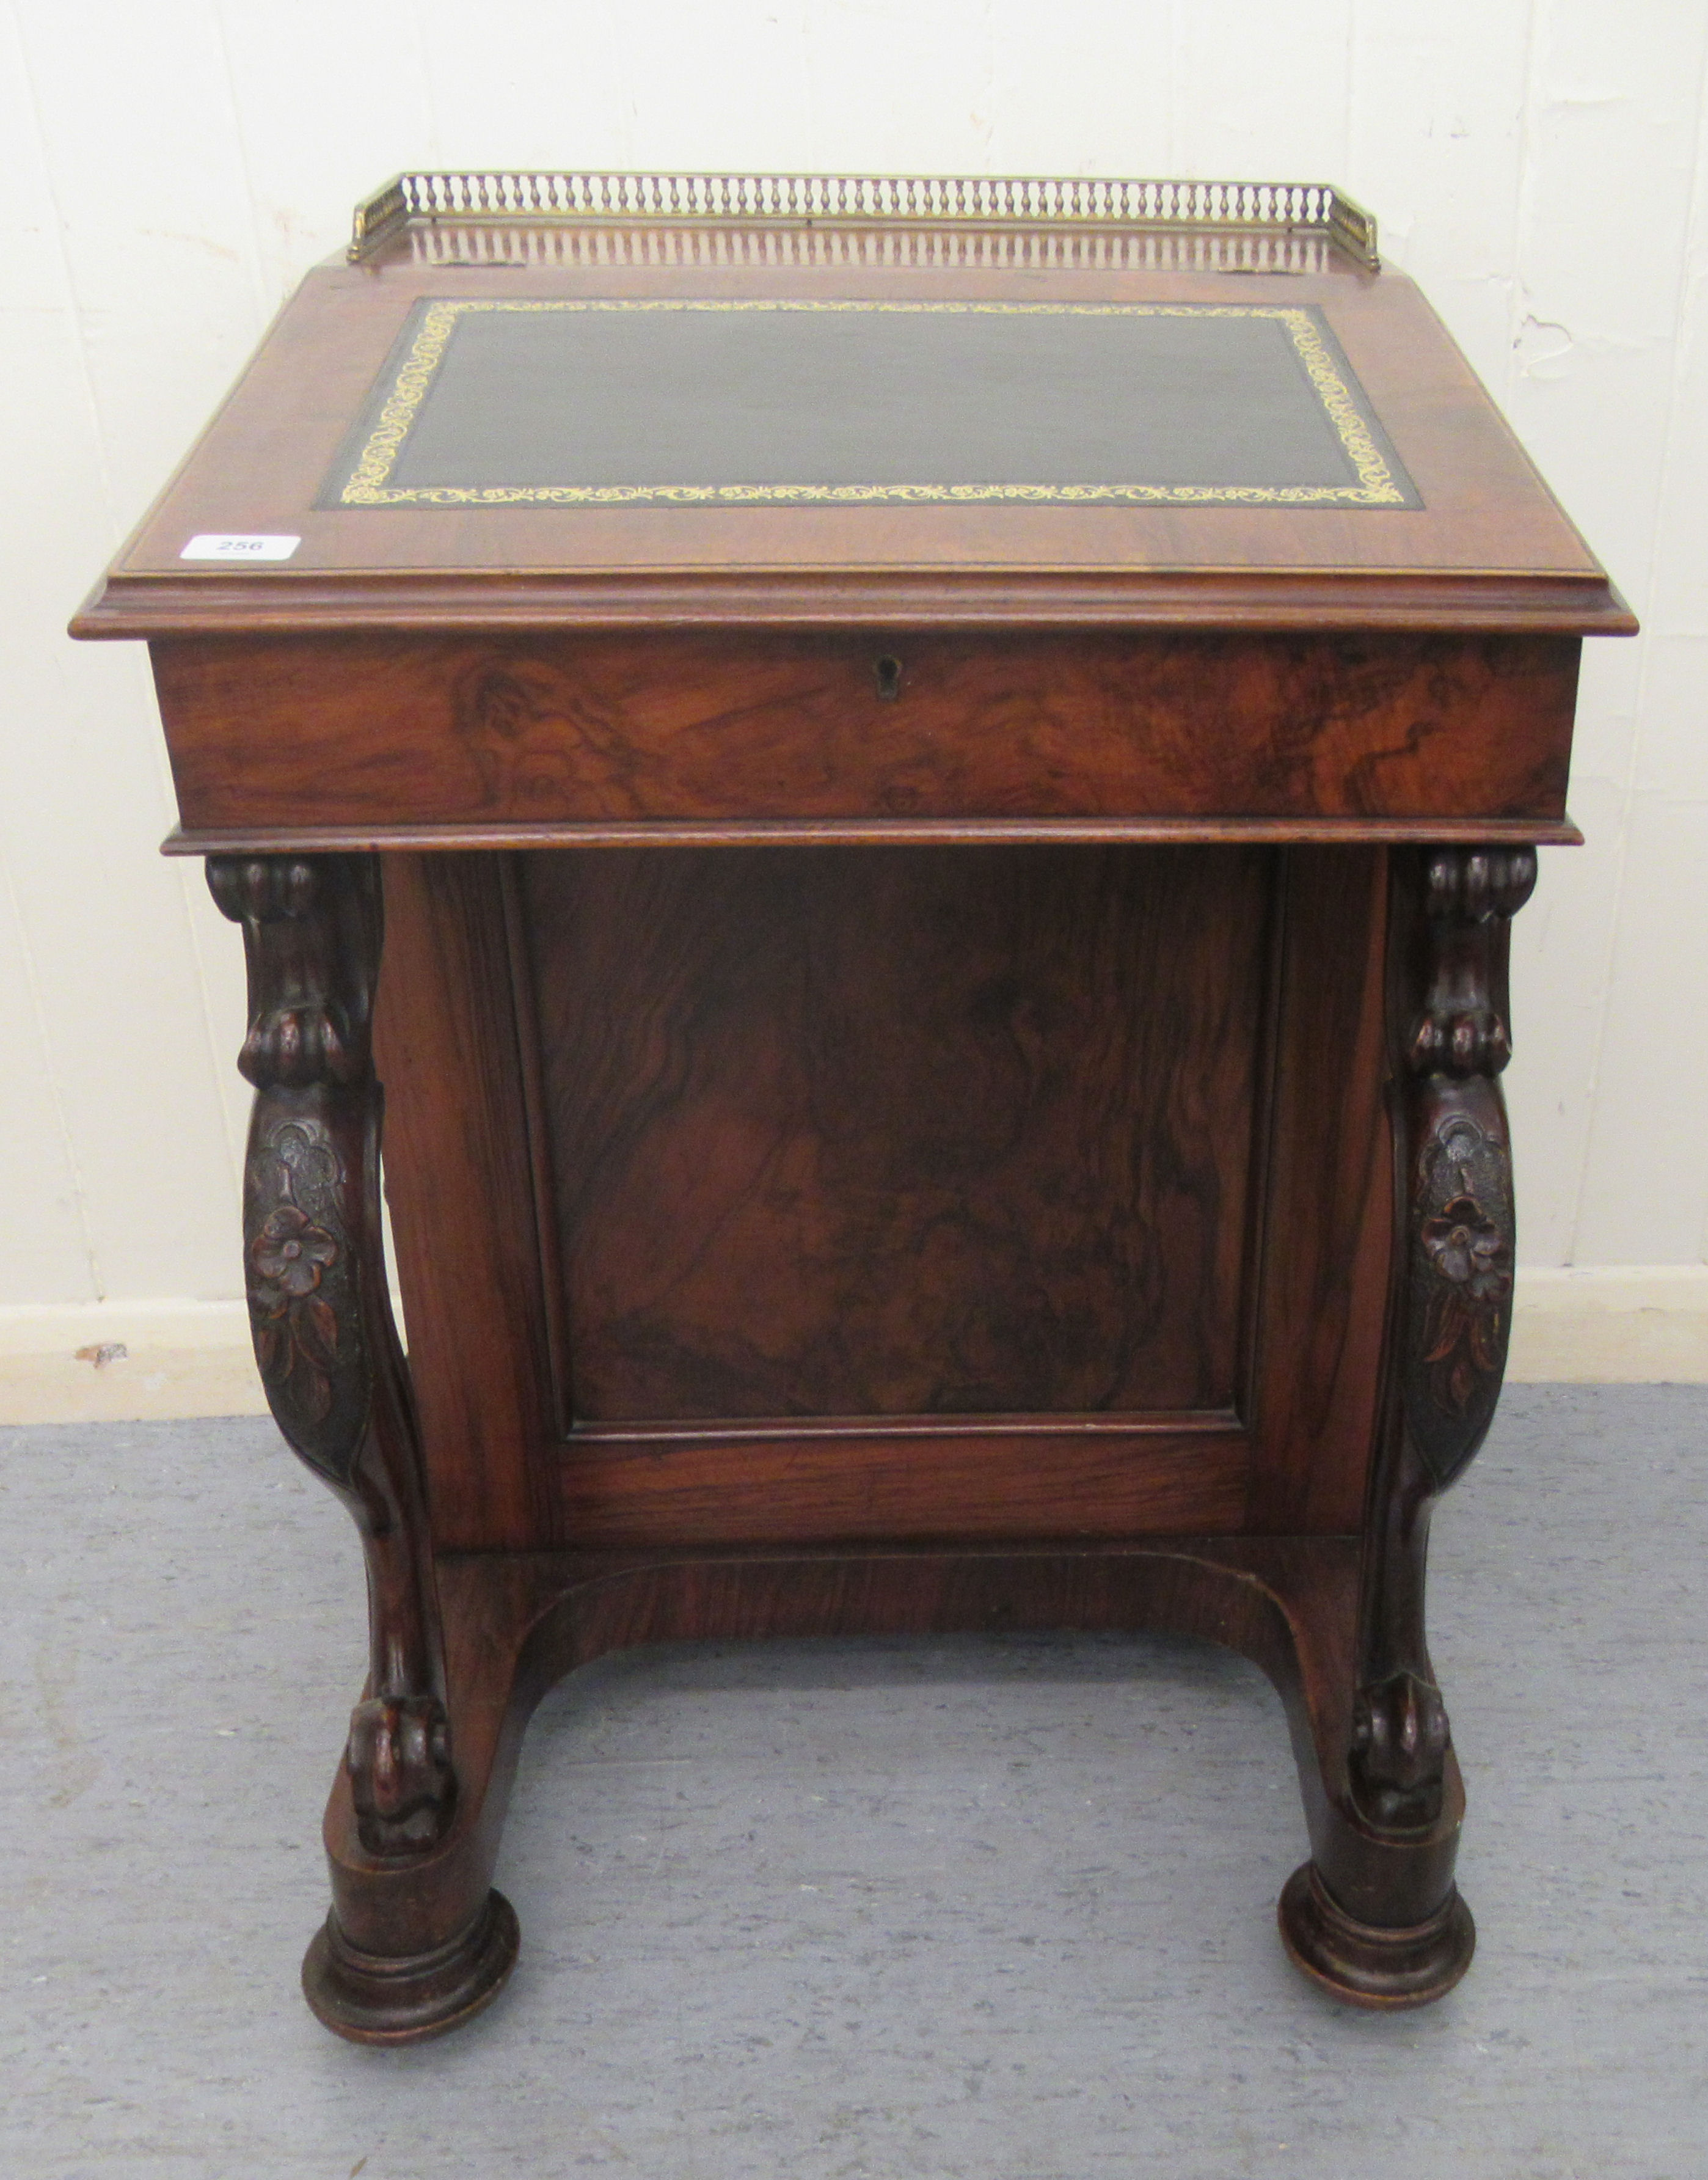 A mid Victorian walnut Davenport with a brass galleried top and an angled, hinged, tooled green hide